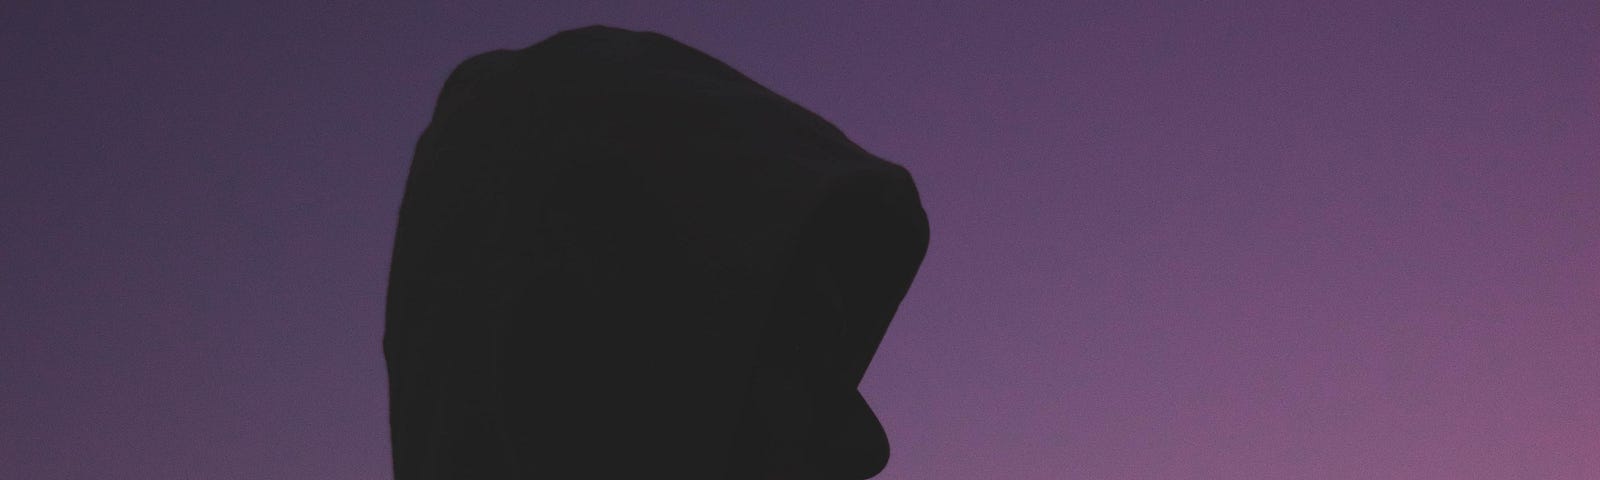 A silhouette of someone looking sad against a sunset.